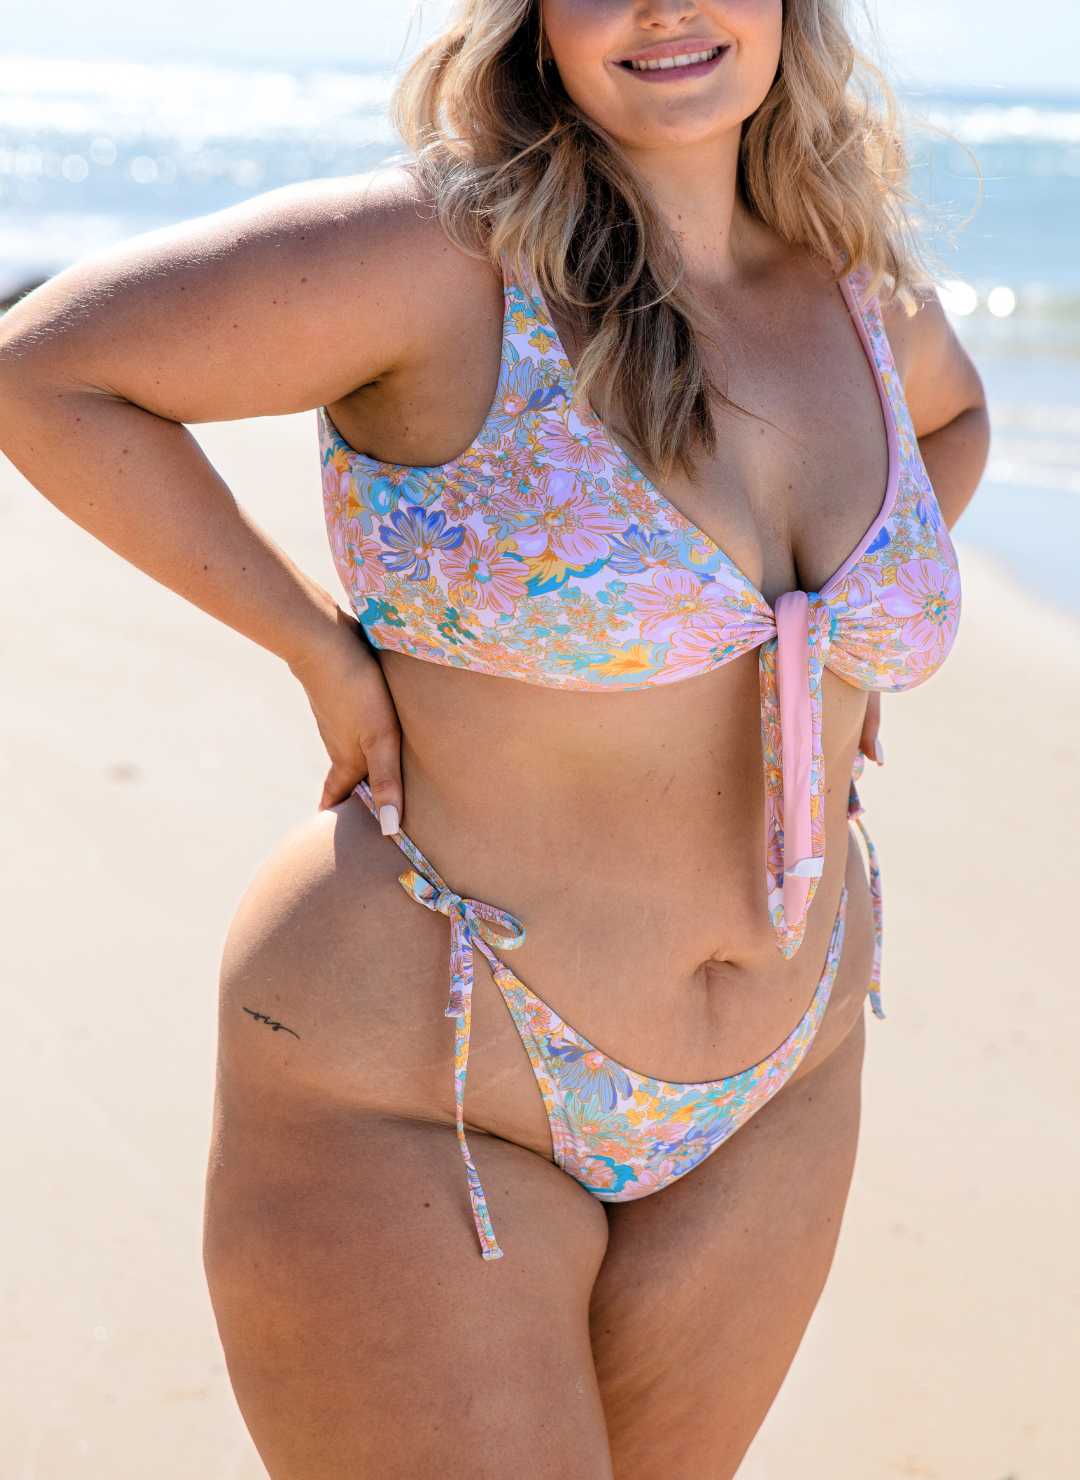 10 BEST SWIMSUIT TIPS FOR WIDE HIPS & BIG THIGHS